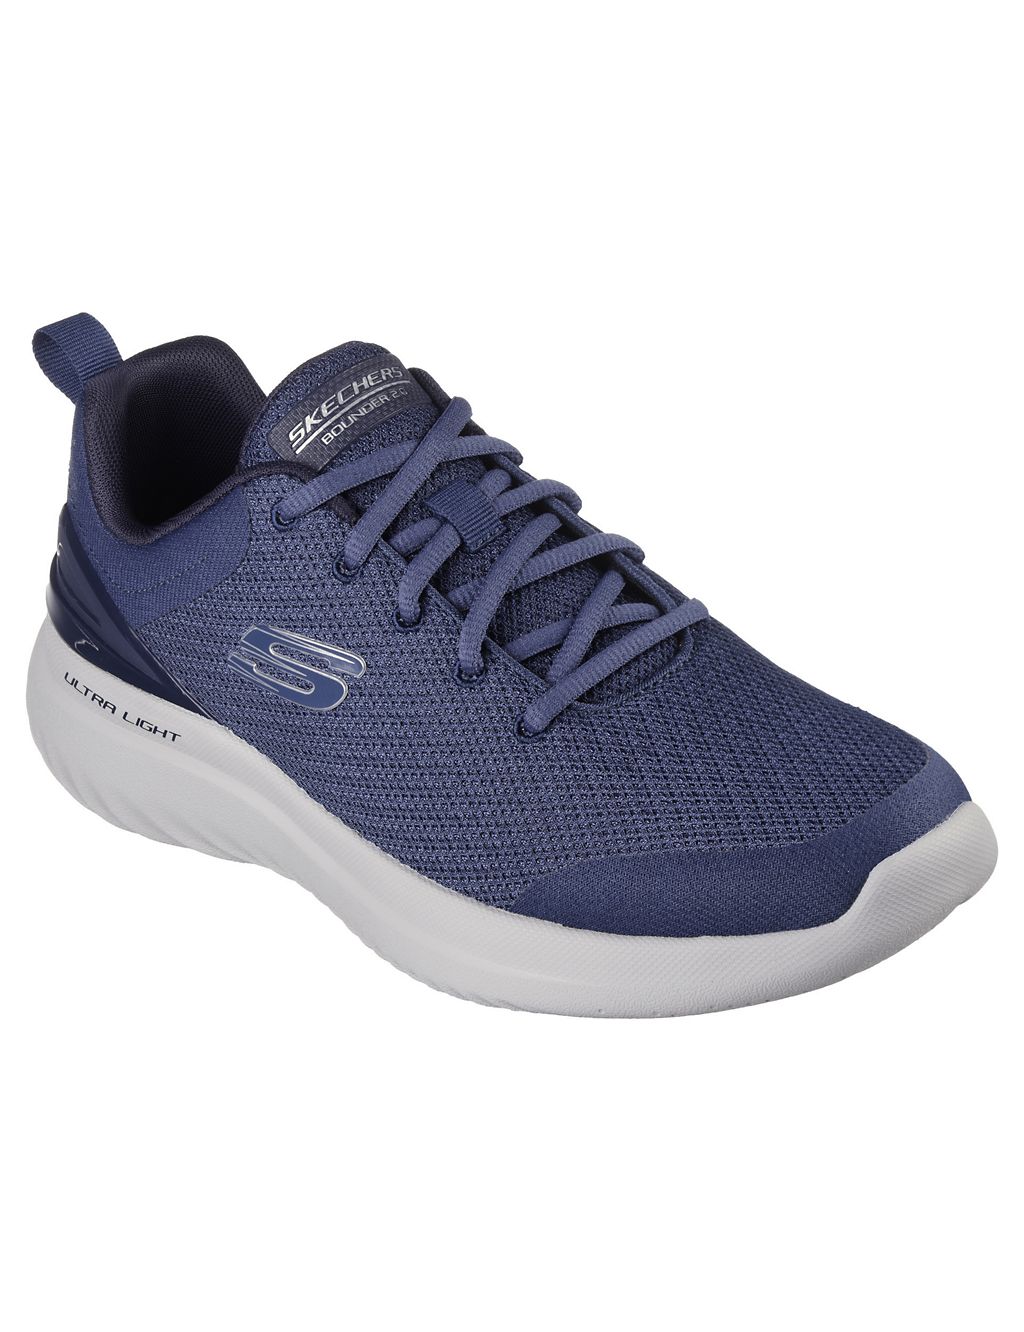 Bounder 2.0 Nasher Lace Up Trainers | Skechers | M&S